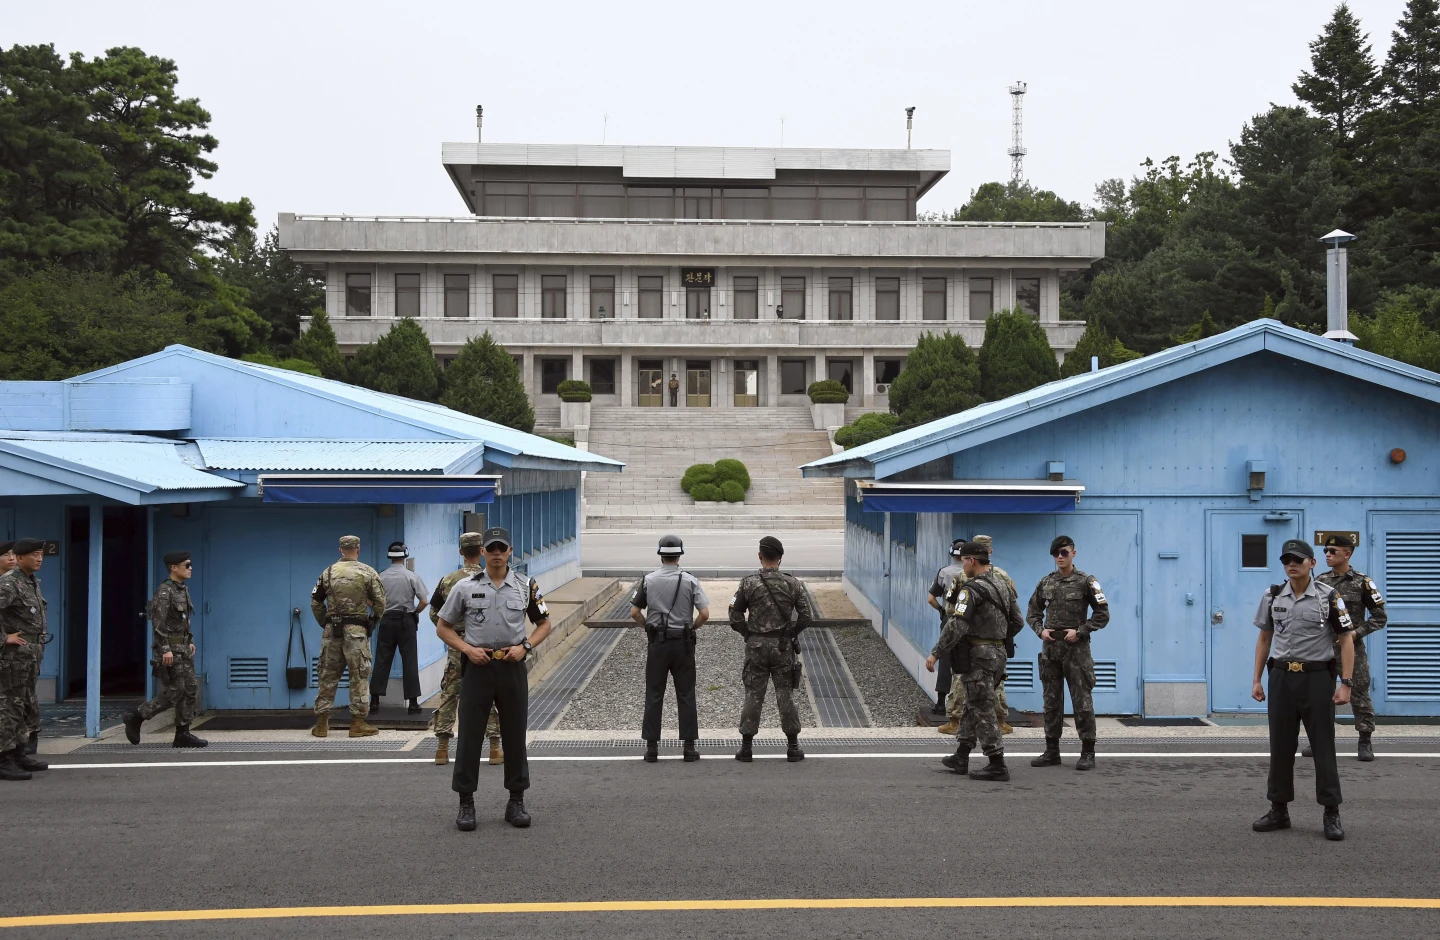 An American soldier who had spent nearly two months in a South Korean prison defected across the heavily guarded border into North Korea